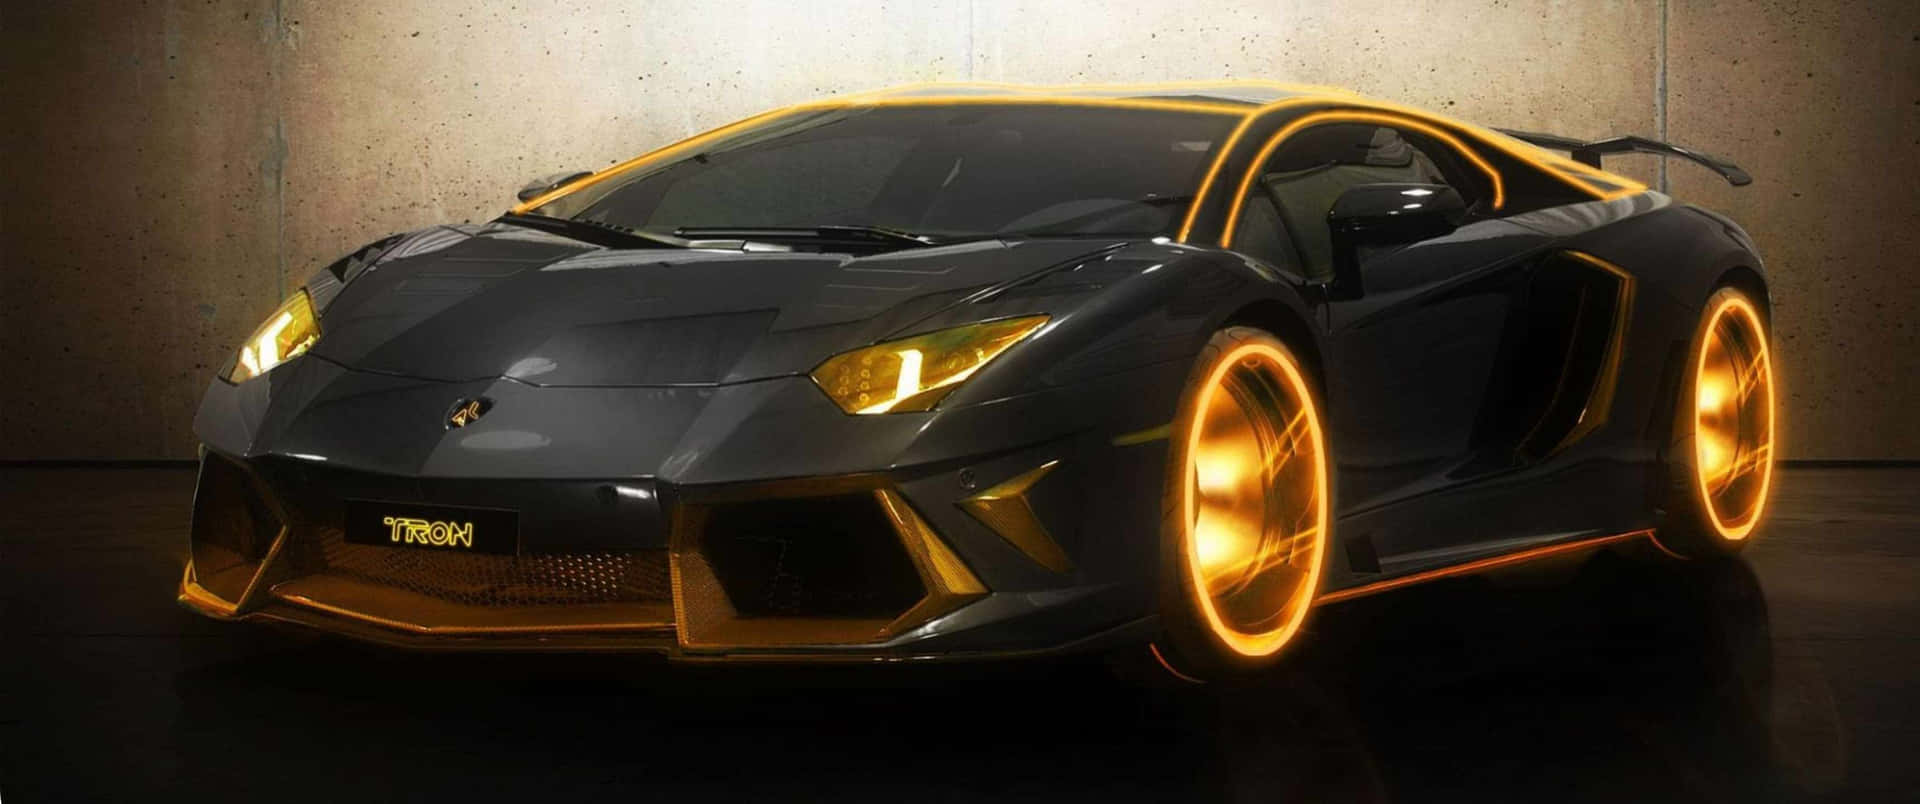 Speed and Style: Speed through life with this luxurious Lamborghini.